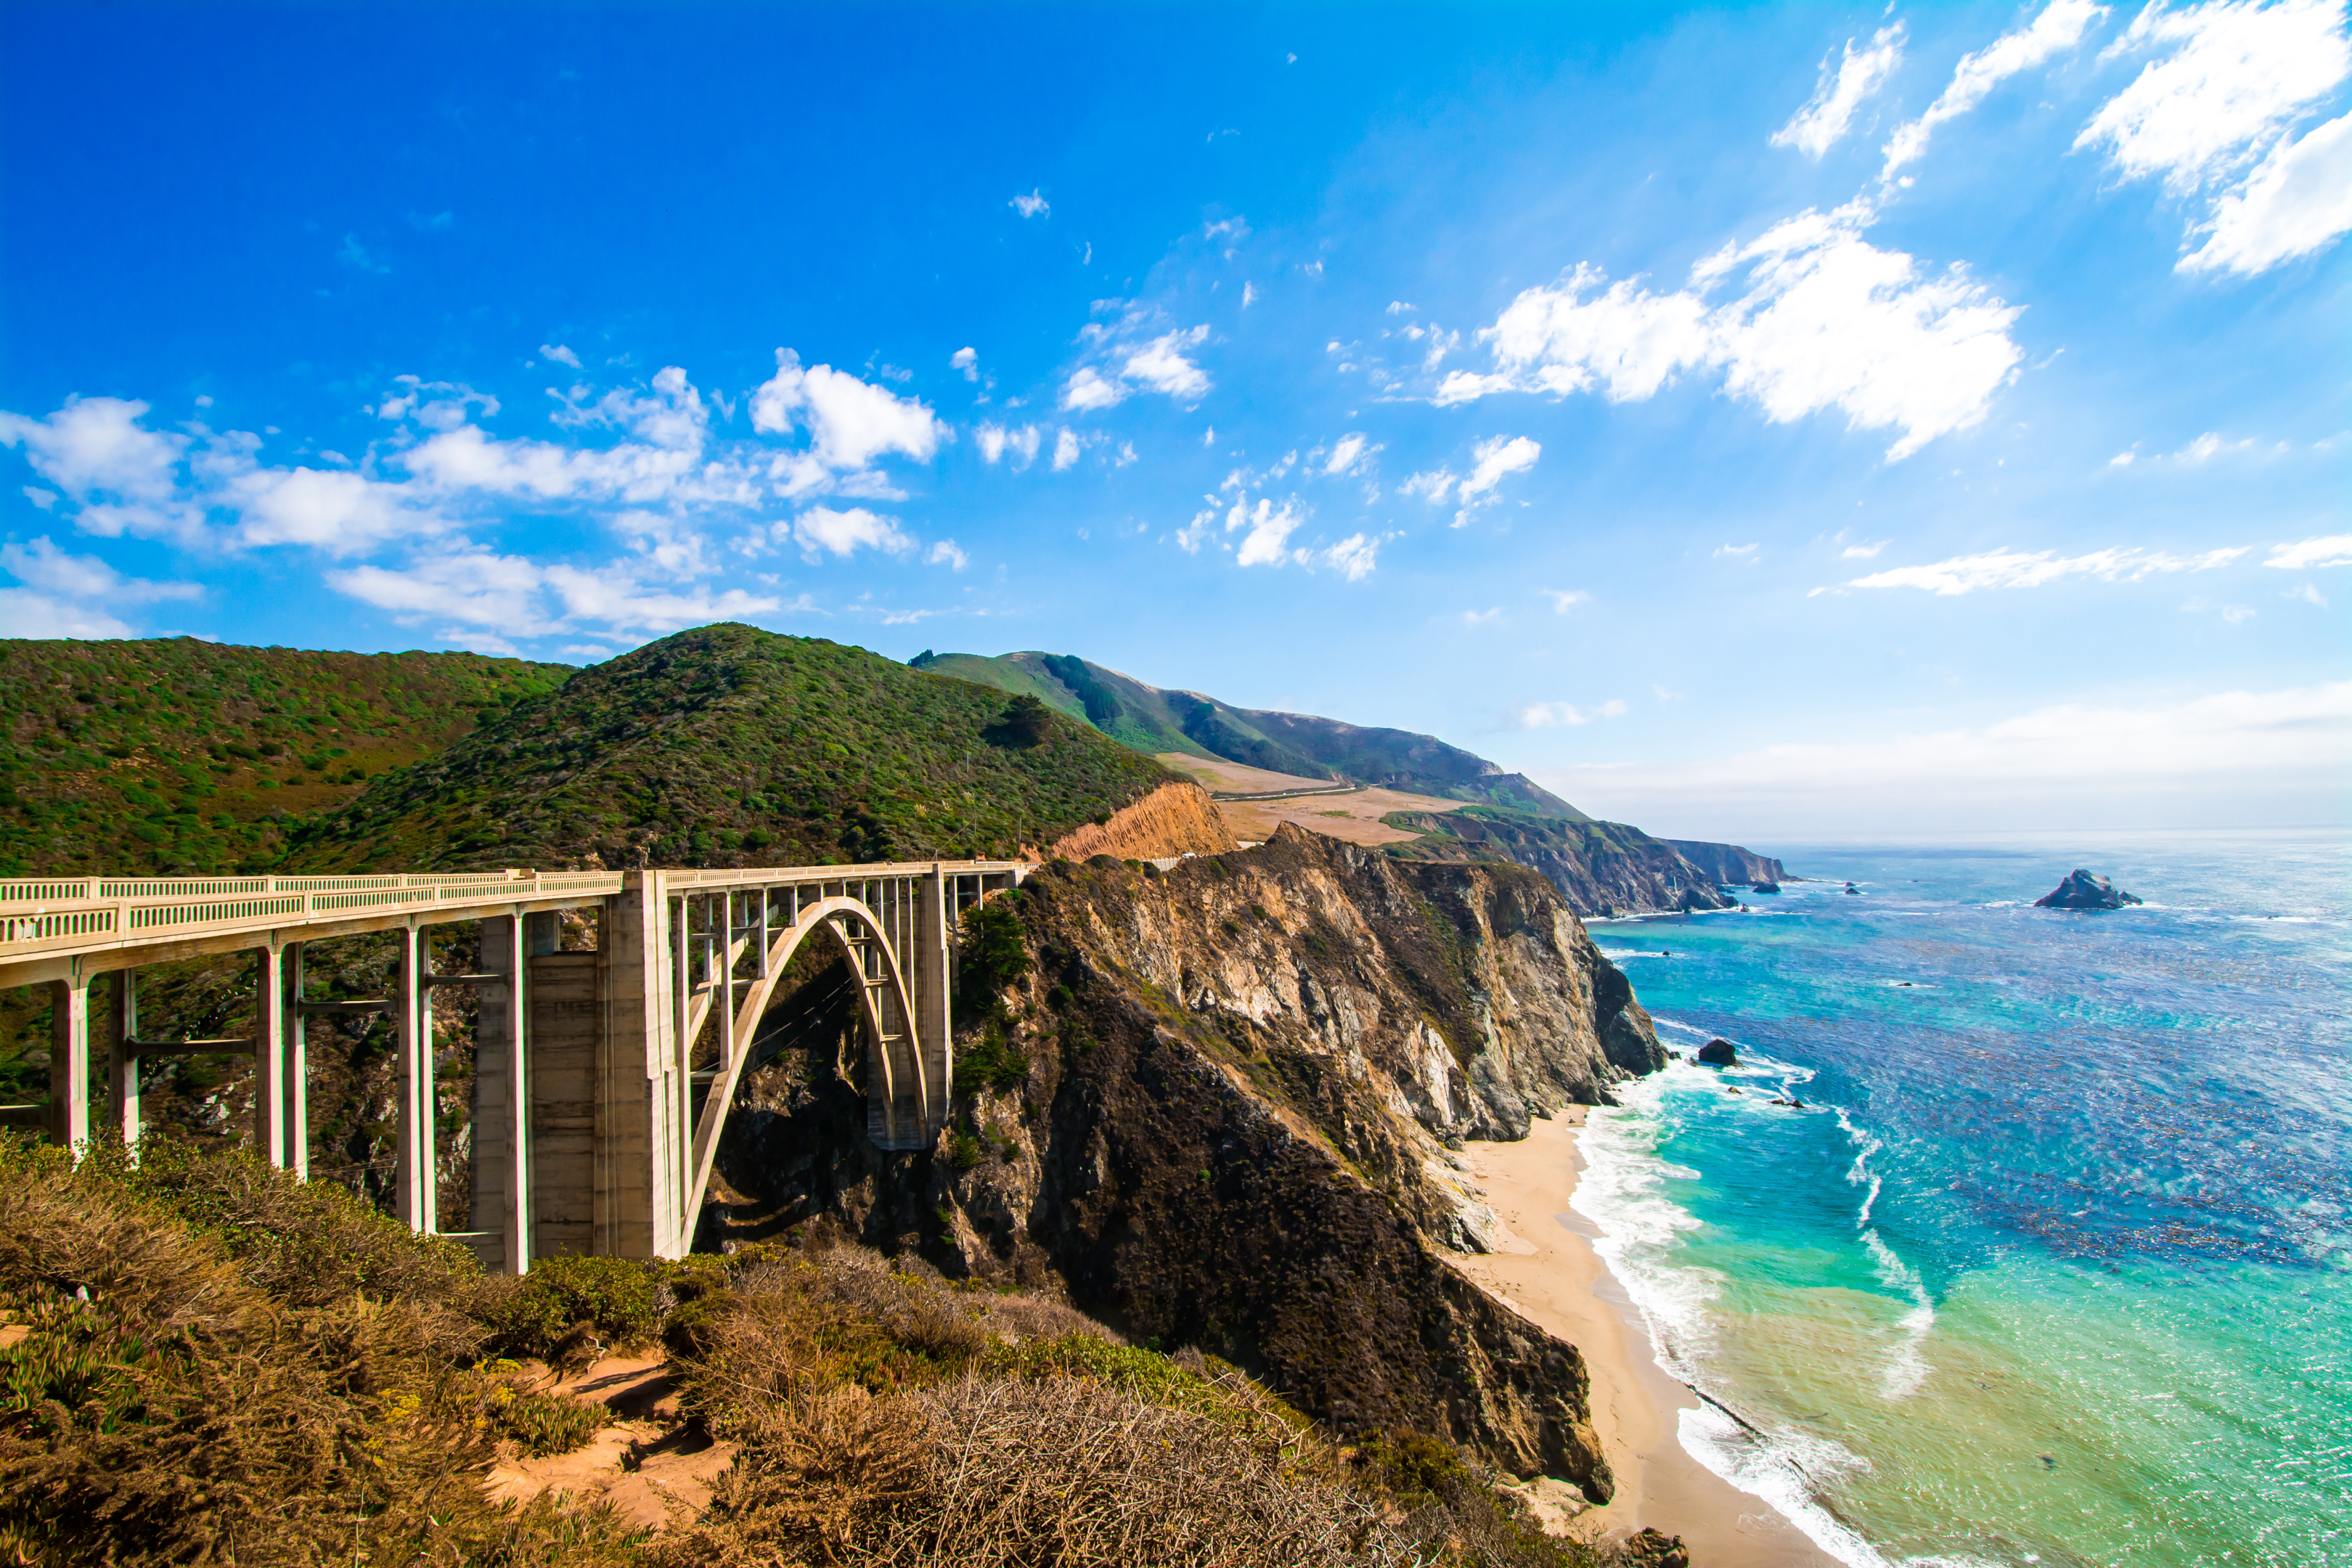 A view of the Pacific Coast Highway in California in Big Sur